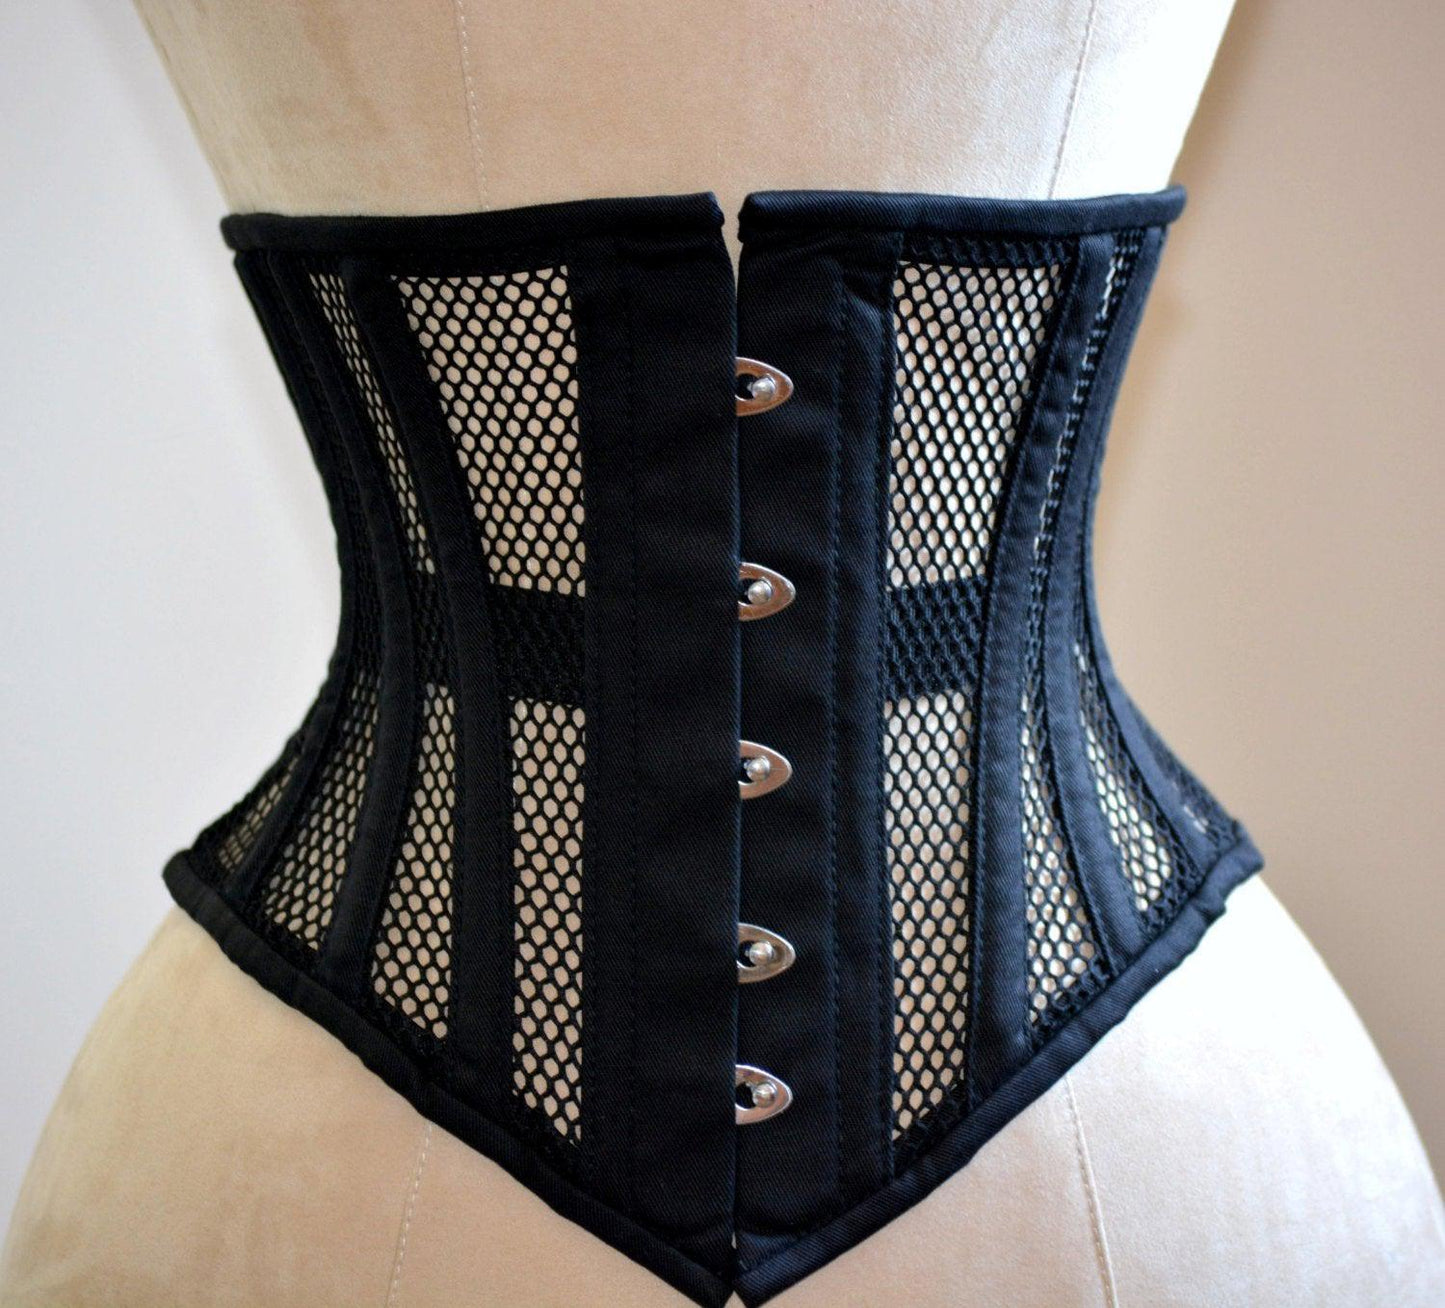 Real Leather Waist Steel-boned Authentic Corset With Steampunk Hooks. Corset  for Tight Lacing and Waist Training, Steampunk, Gothic -  Canada